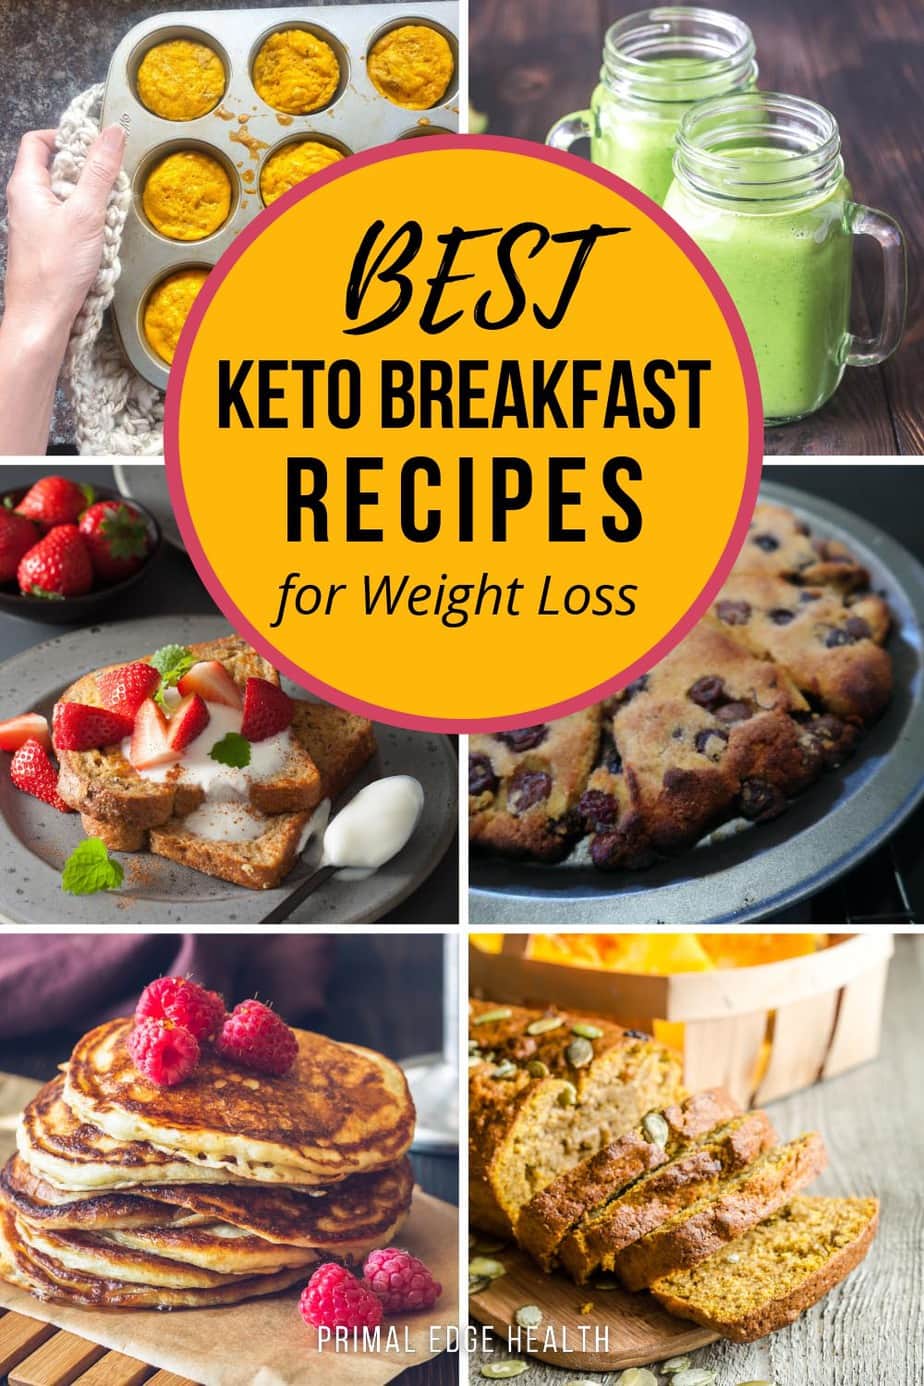 Best Keto Breakfast Recipes For Weight Loss